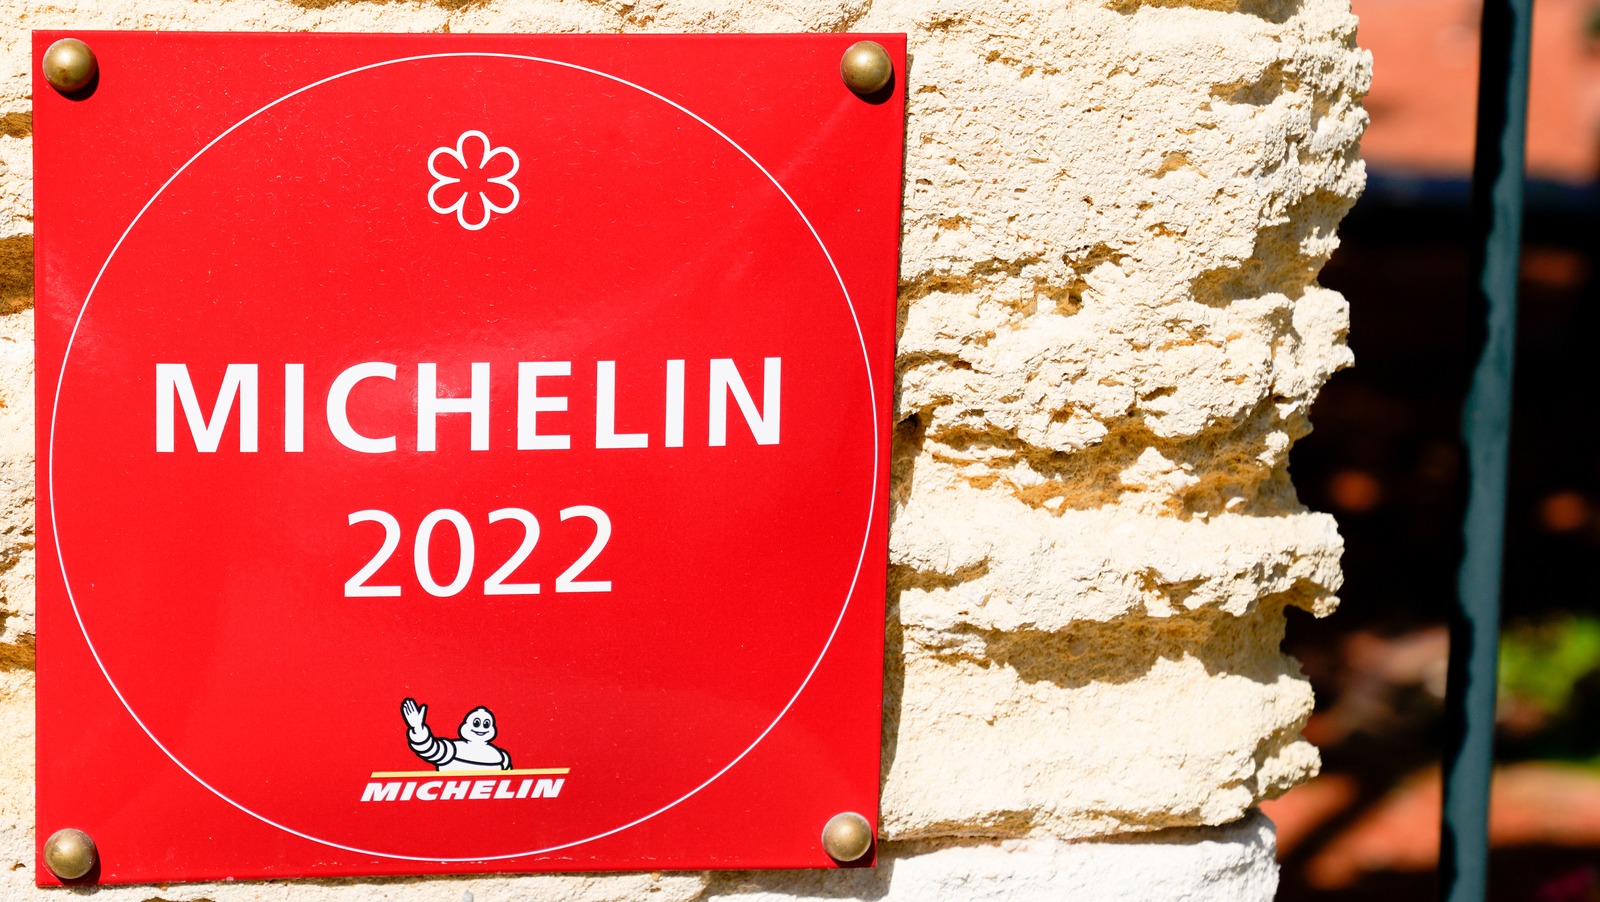 Why These Famous Restaurants Lost Their Michelin Stars